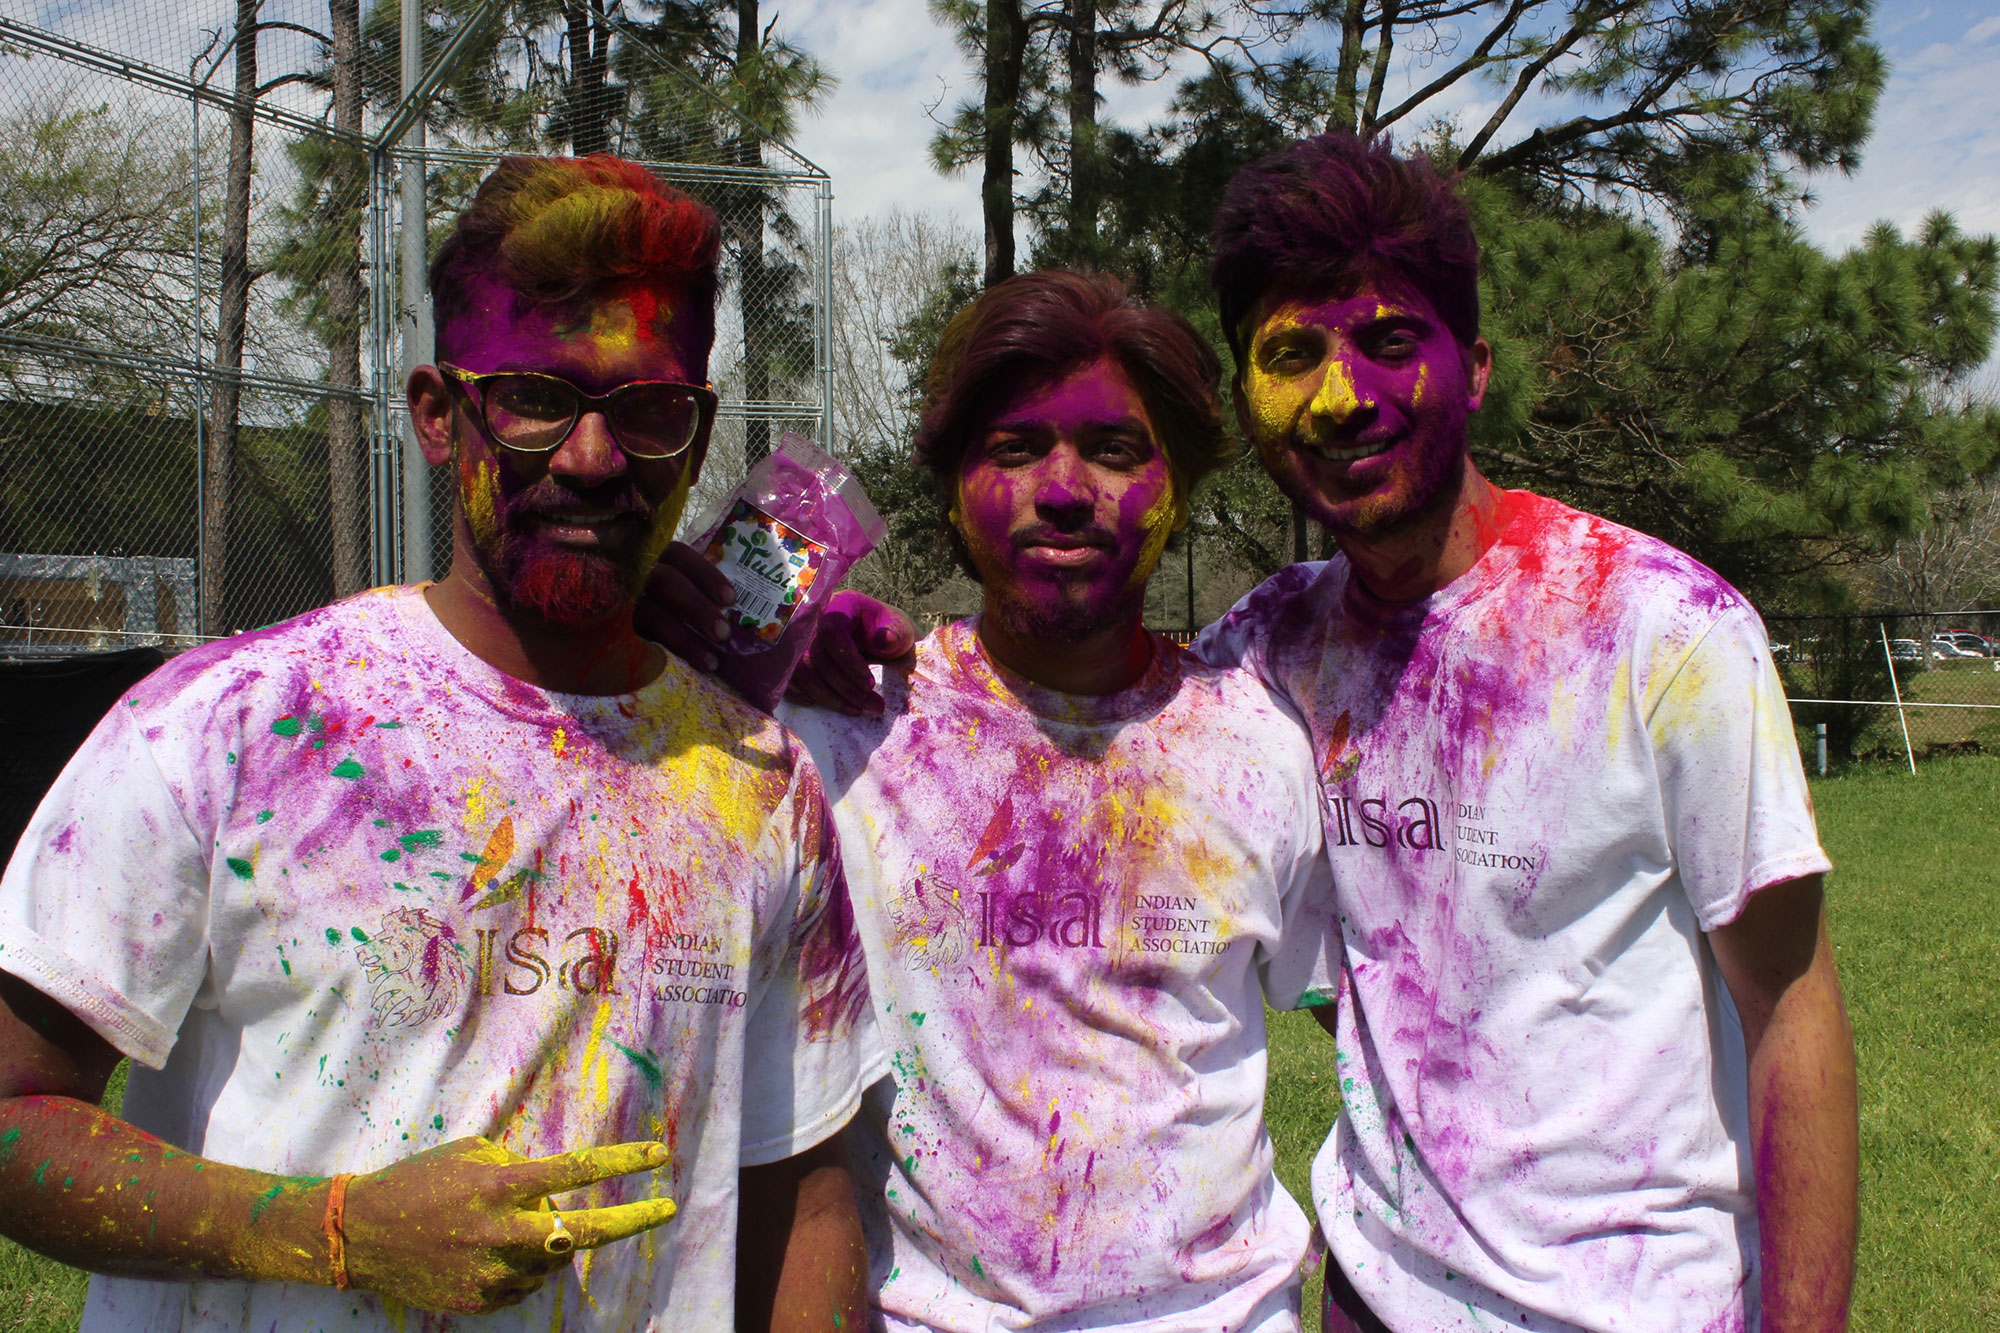 Photo: Ashish Shukla, Management Information Systems Major; Harshal Wasekar, Management Information Systems major; and Parvez Salim, Software Engineering Major, stand covered in purple powder for Holi Friday, Mar. 2nd at the Delta Recreational Field. Photo by The Signal reporter Courtney Cryer.